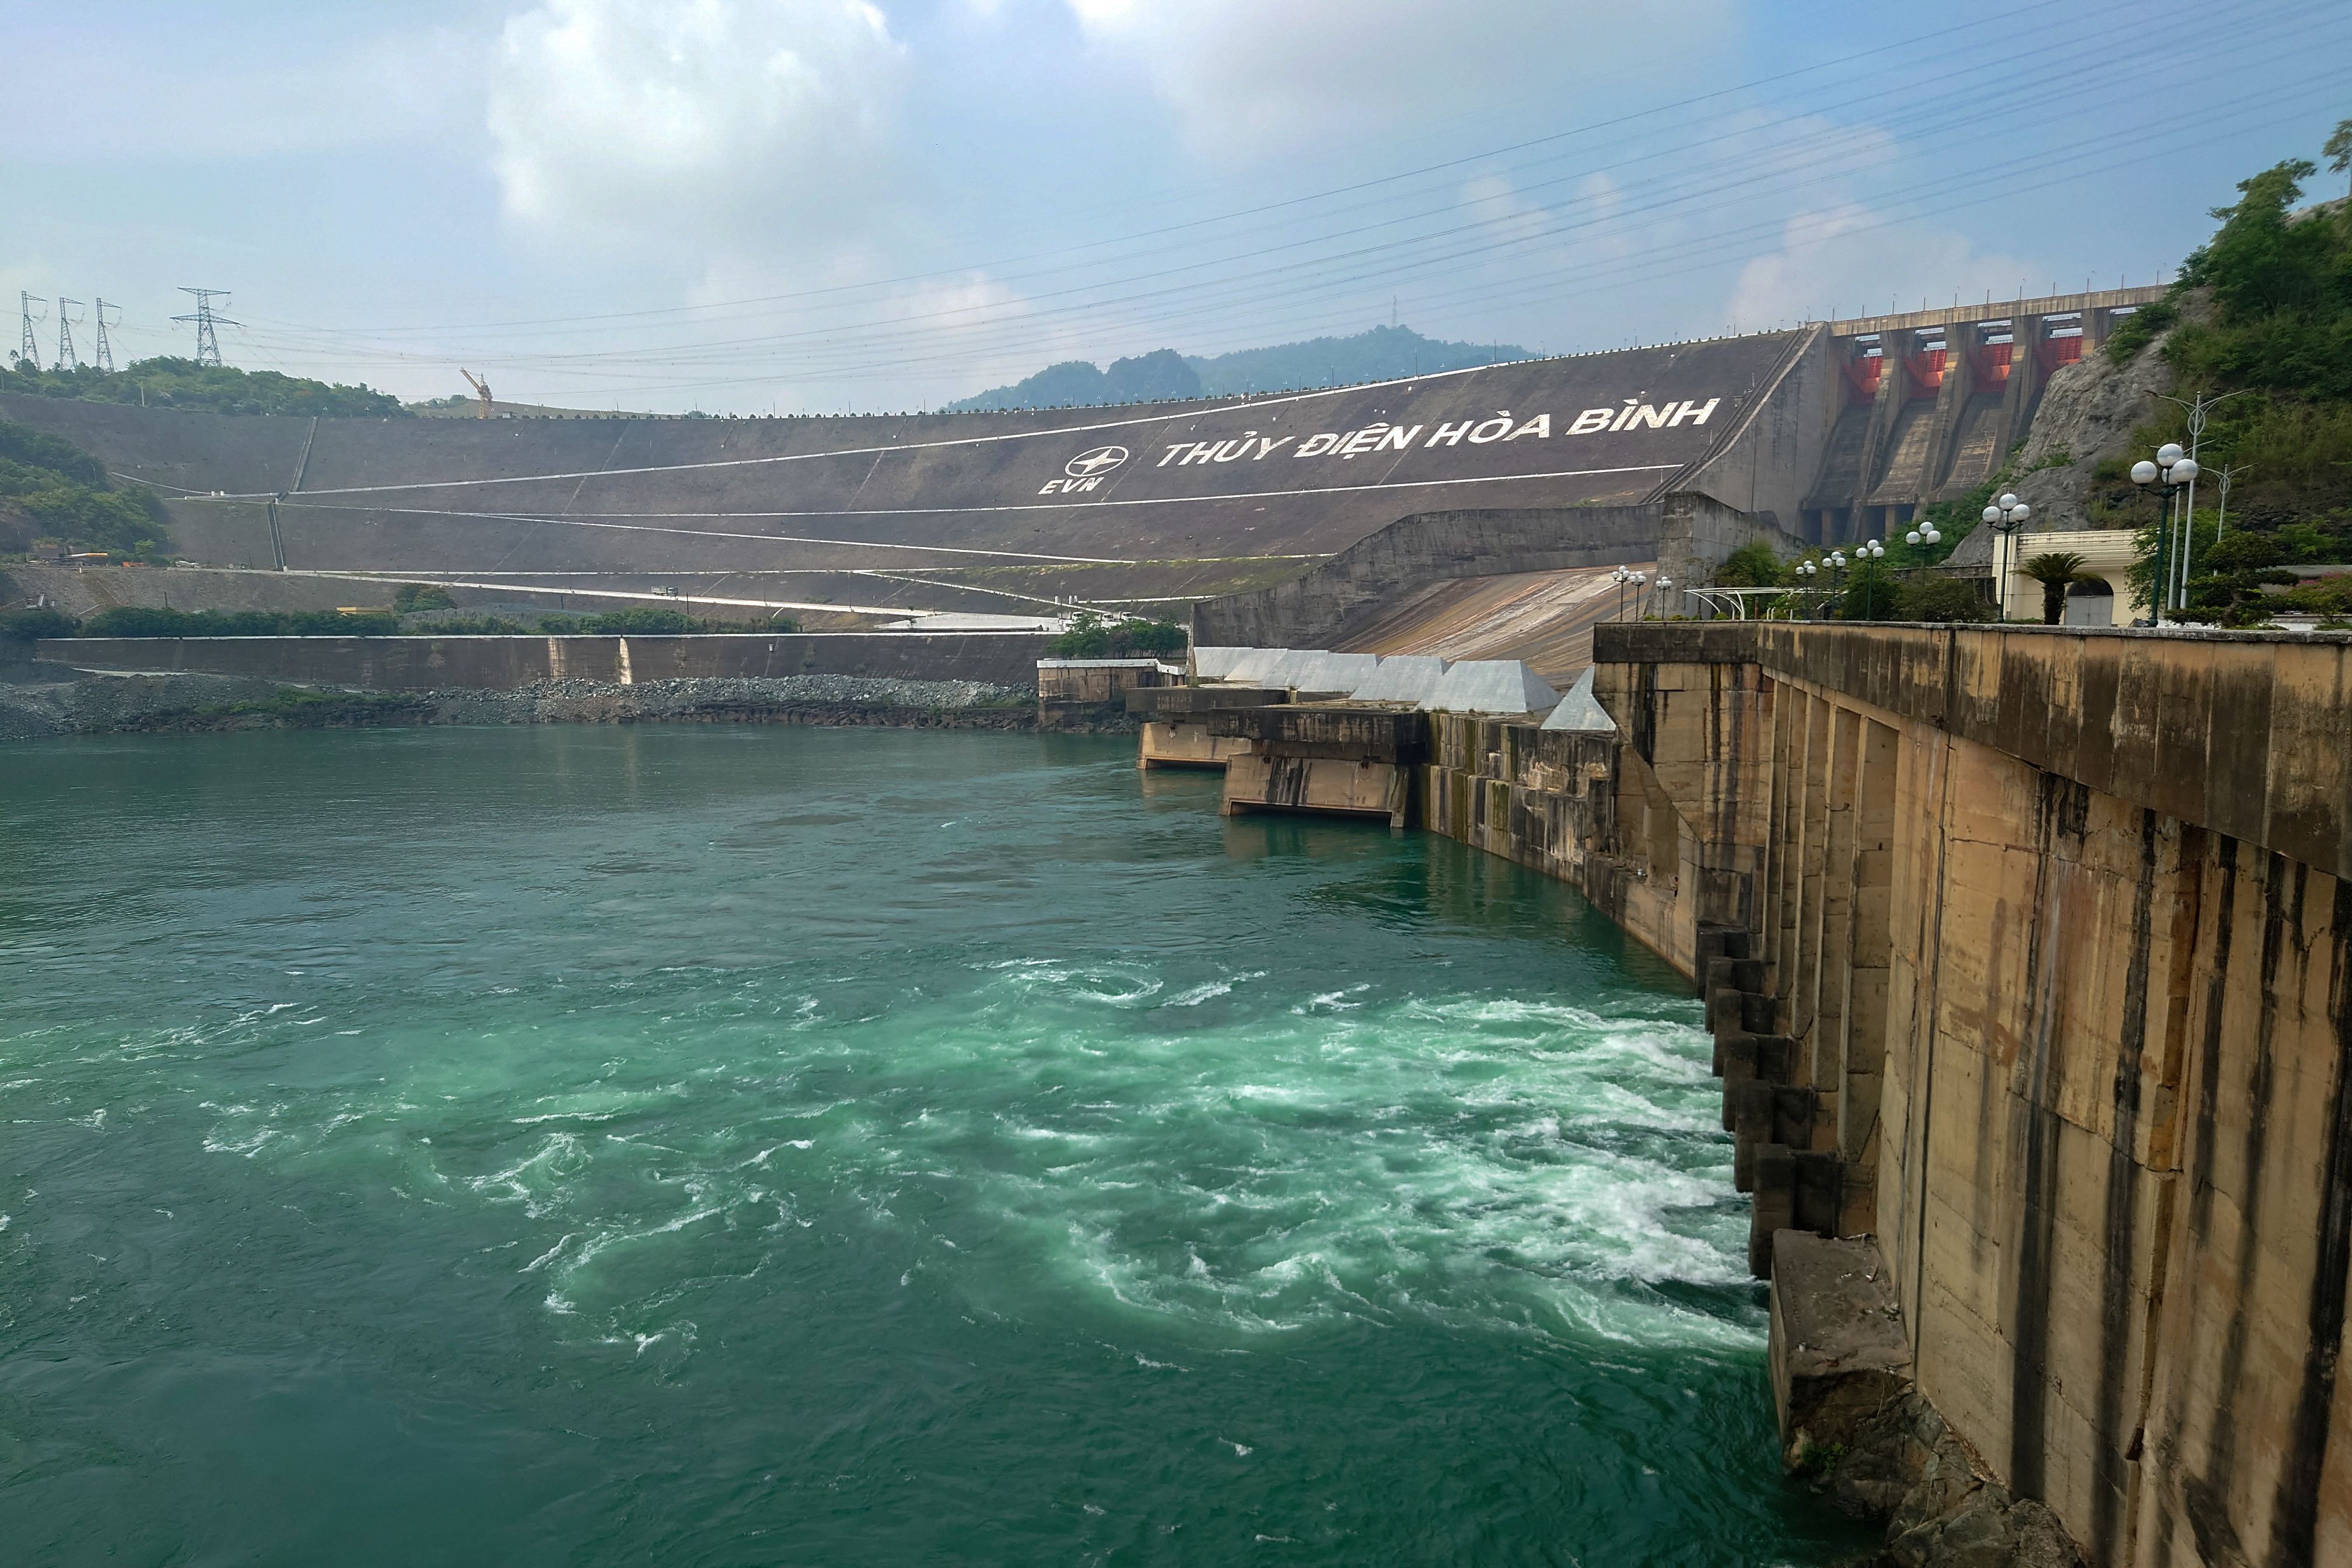 A generic view of Hoa Binh Hydropower Plant, state utility owned by Electricity of Vietnam, in Hoa Binh province